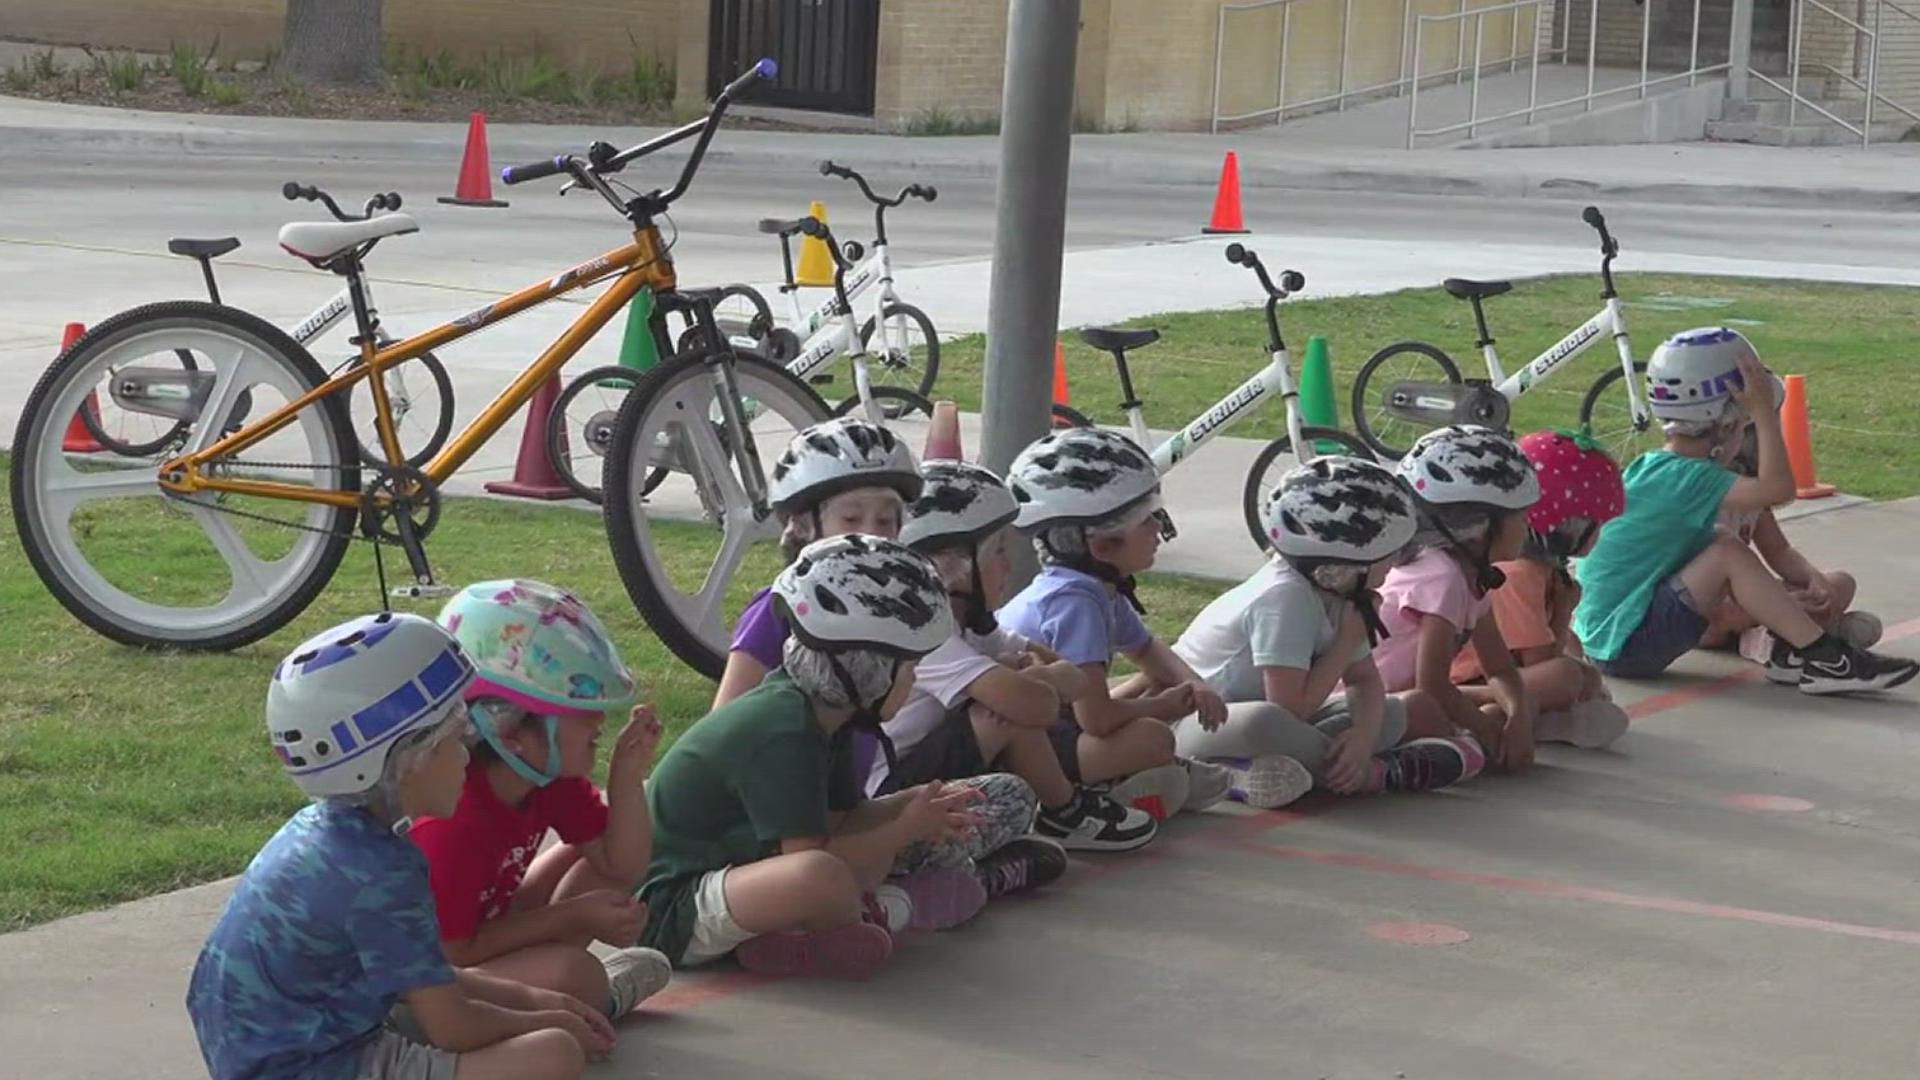 The goal for the event was for parents to see what their children have been working on and learn how they can help improve their child's bike riding skills at home.